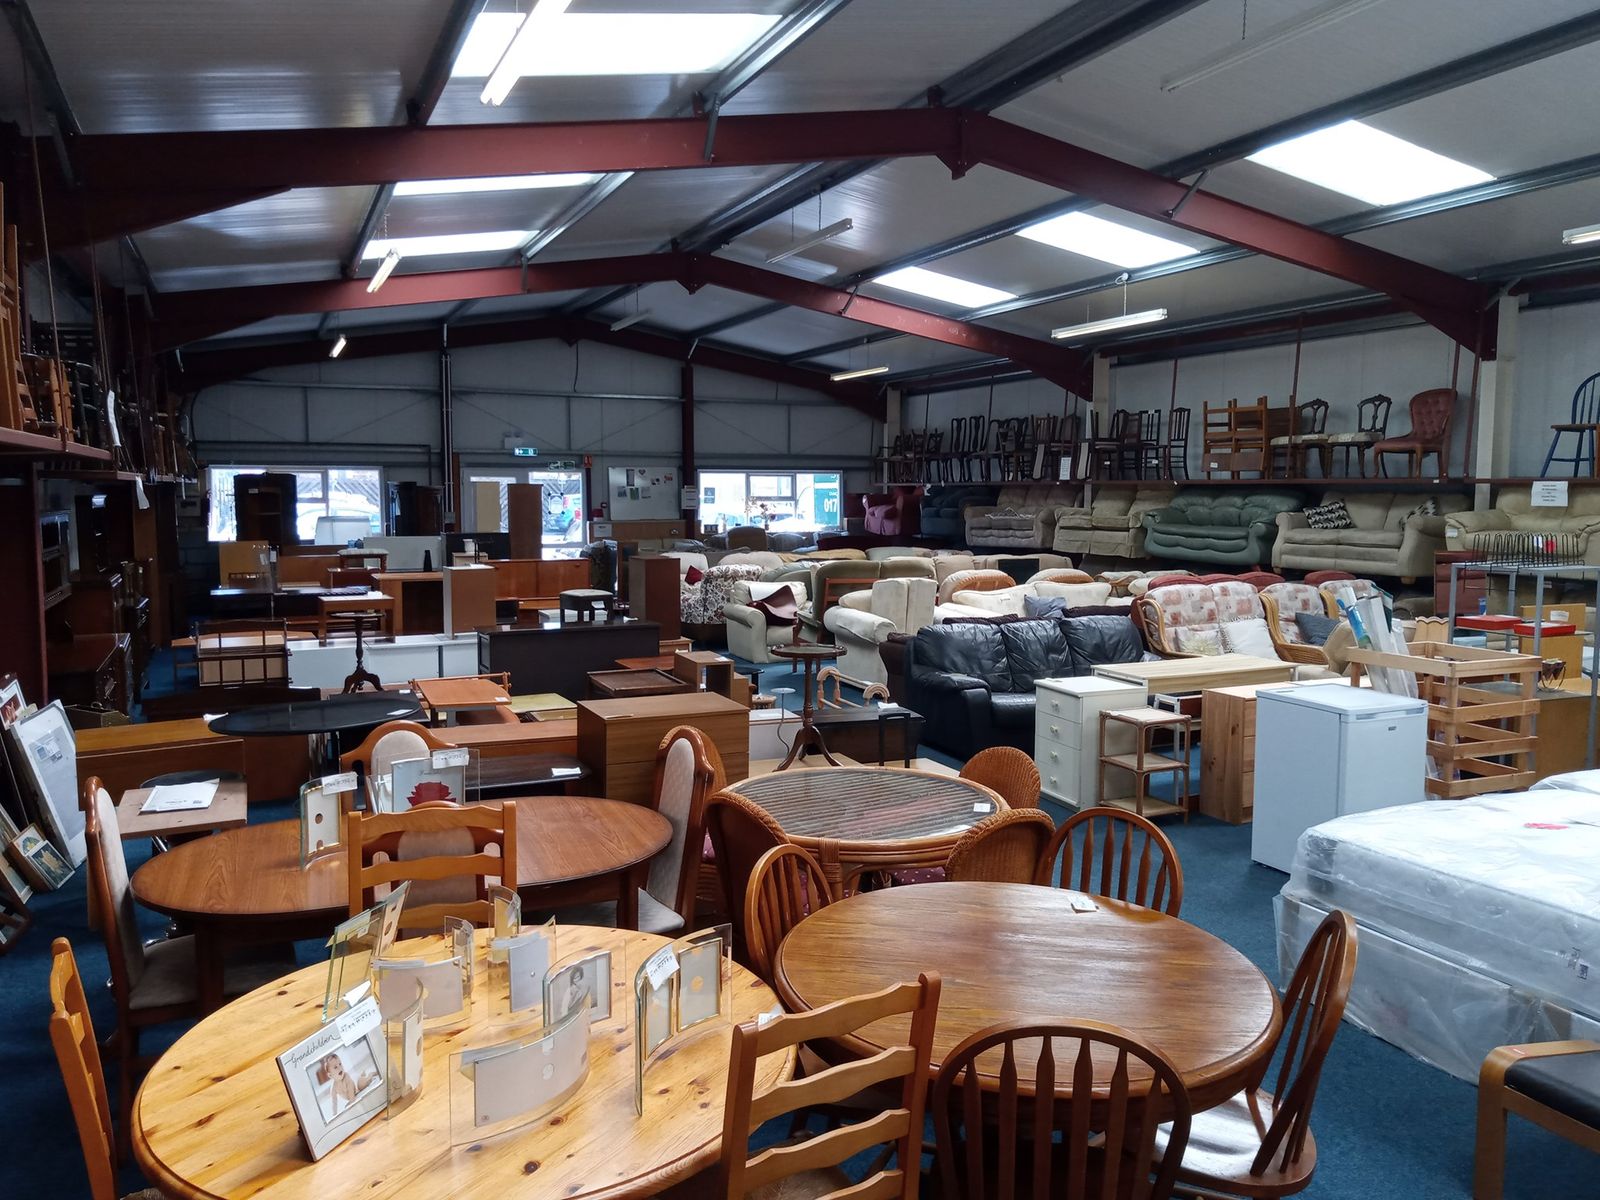 The Community Furniture store